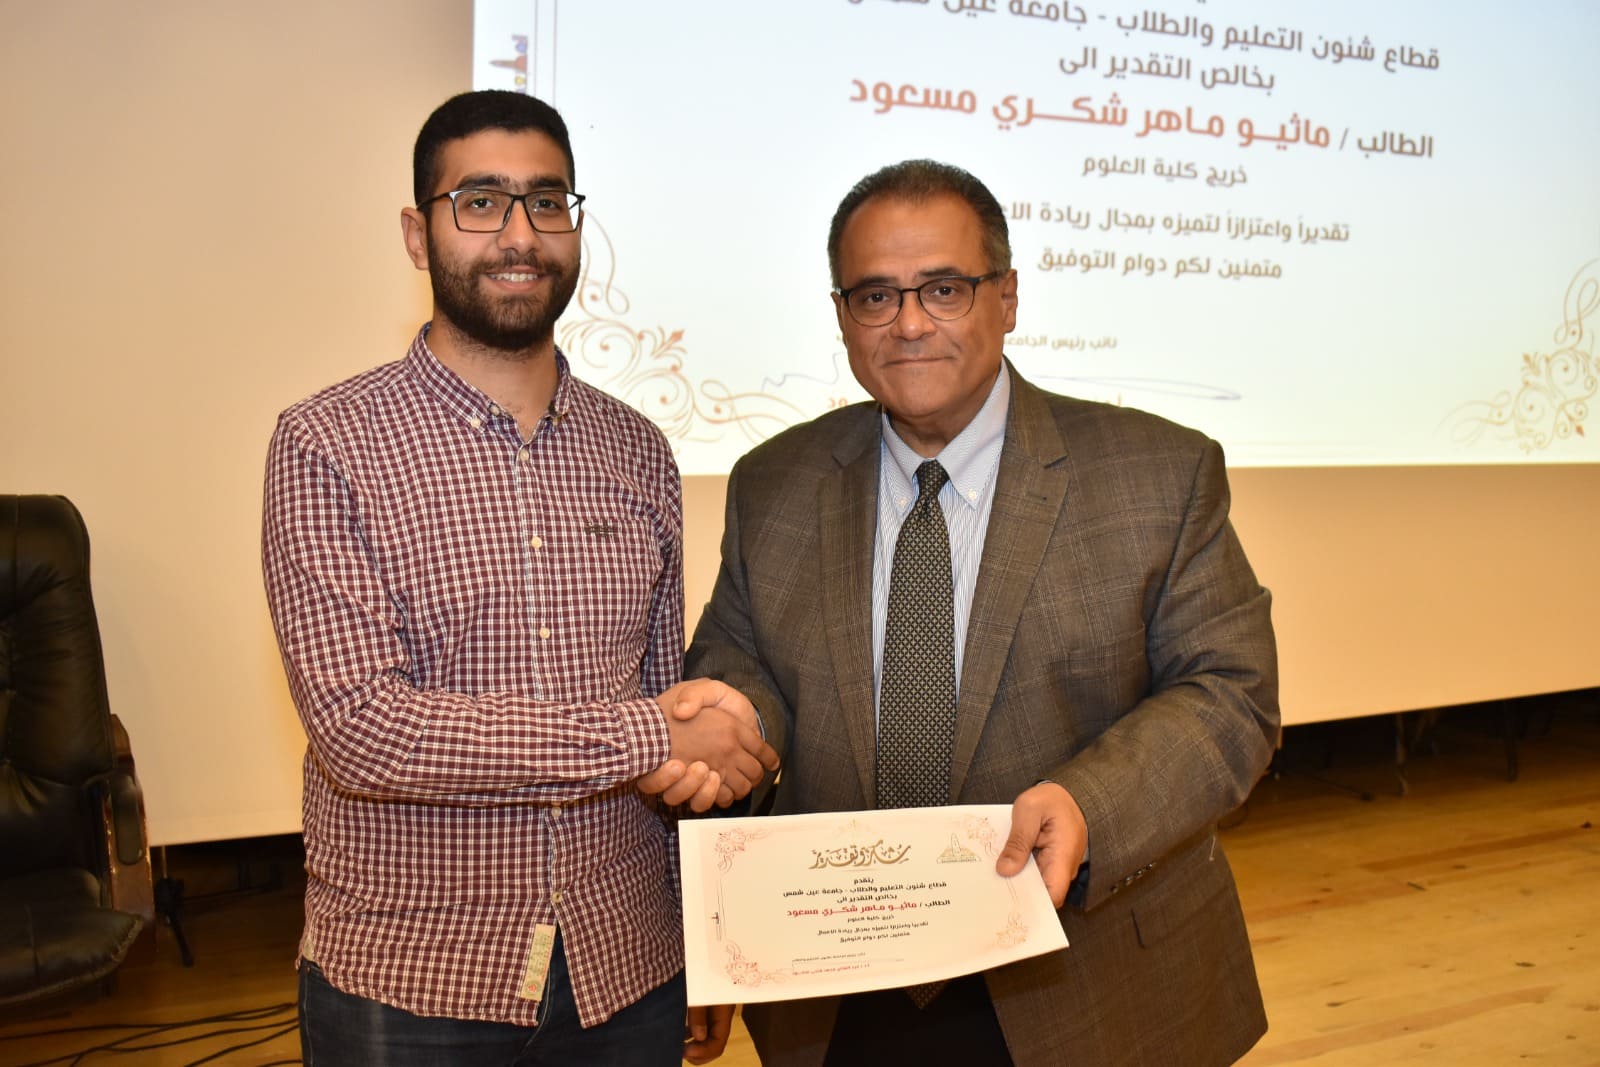 During the Education and Student Affairs Sector Board... Prof. Abdel Fattah Saoud honors graduate Matthew Maher in the field of entrepreneurship